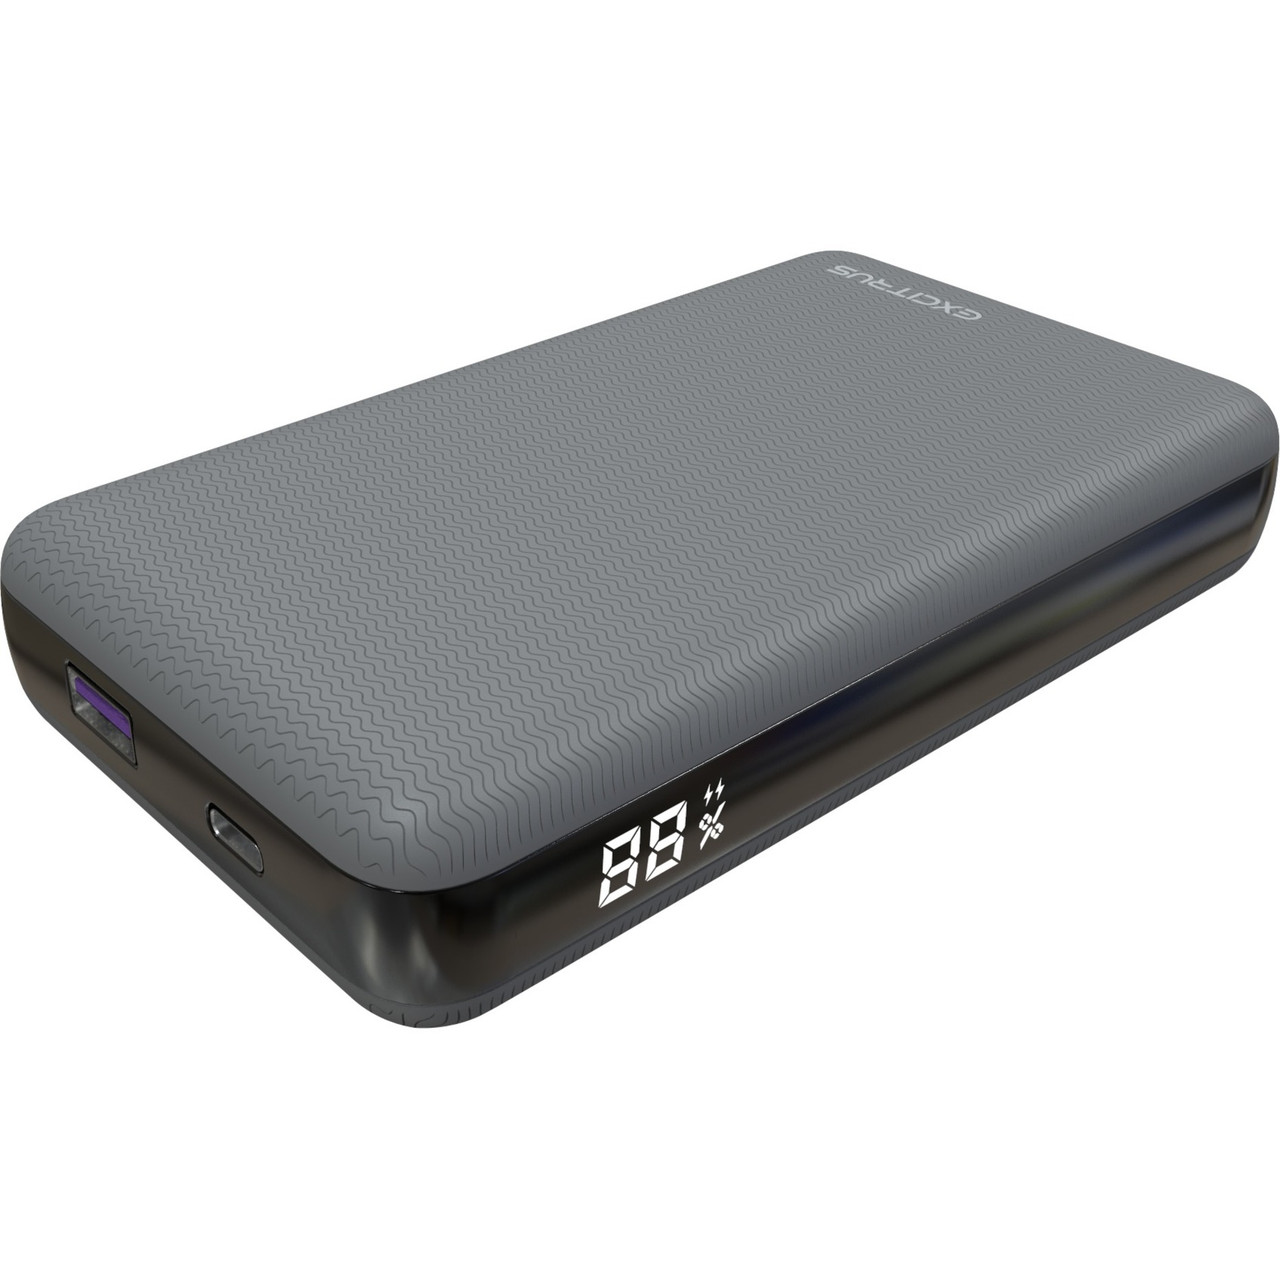 EXCITRUS 105W Power Bank Ultimate - Ultra Fast Charging Power Bank - PD-87180